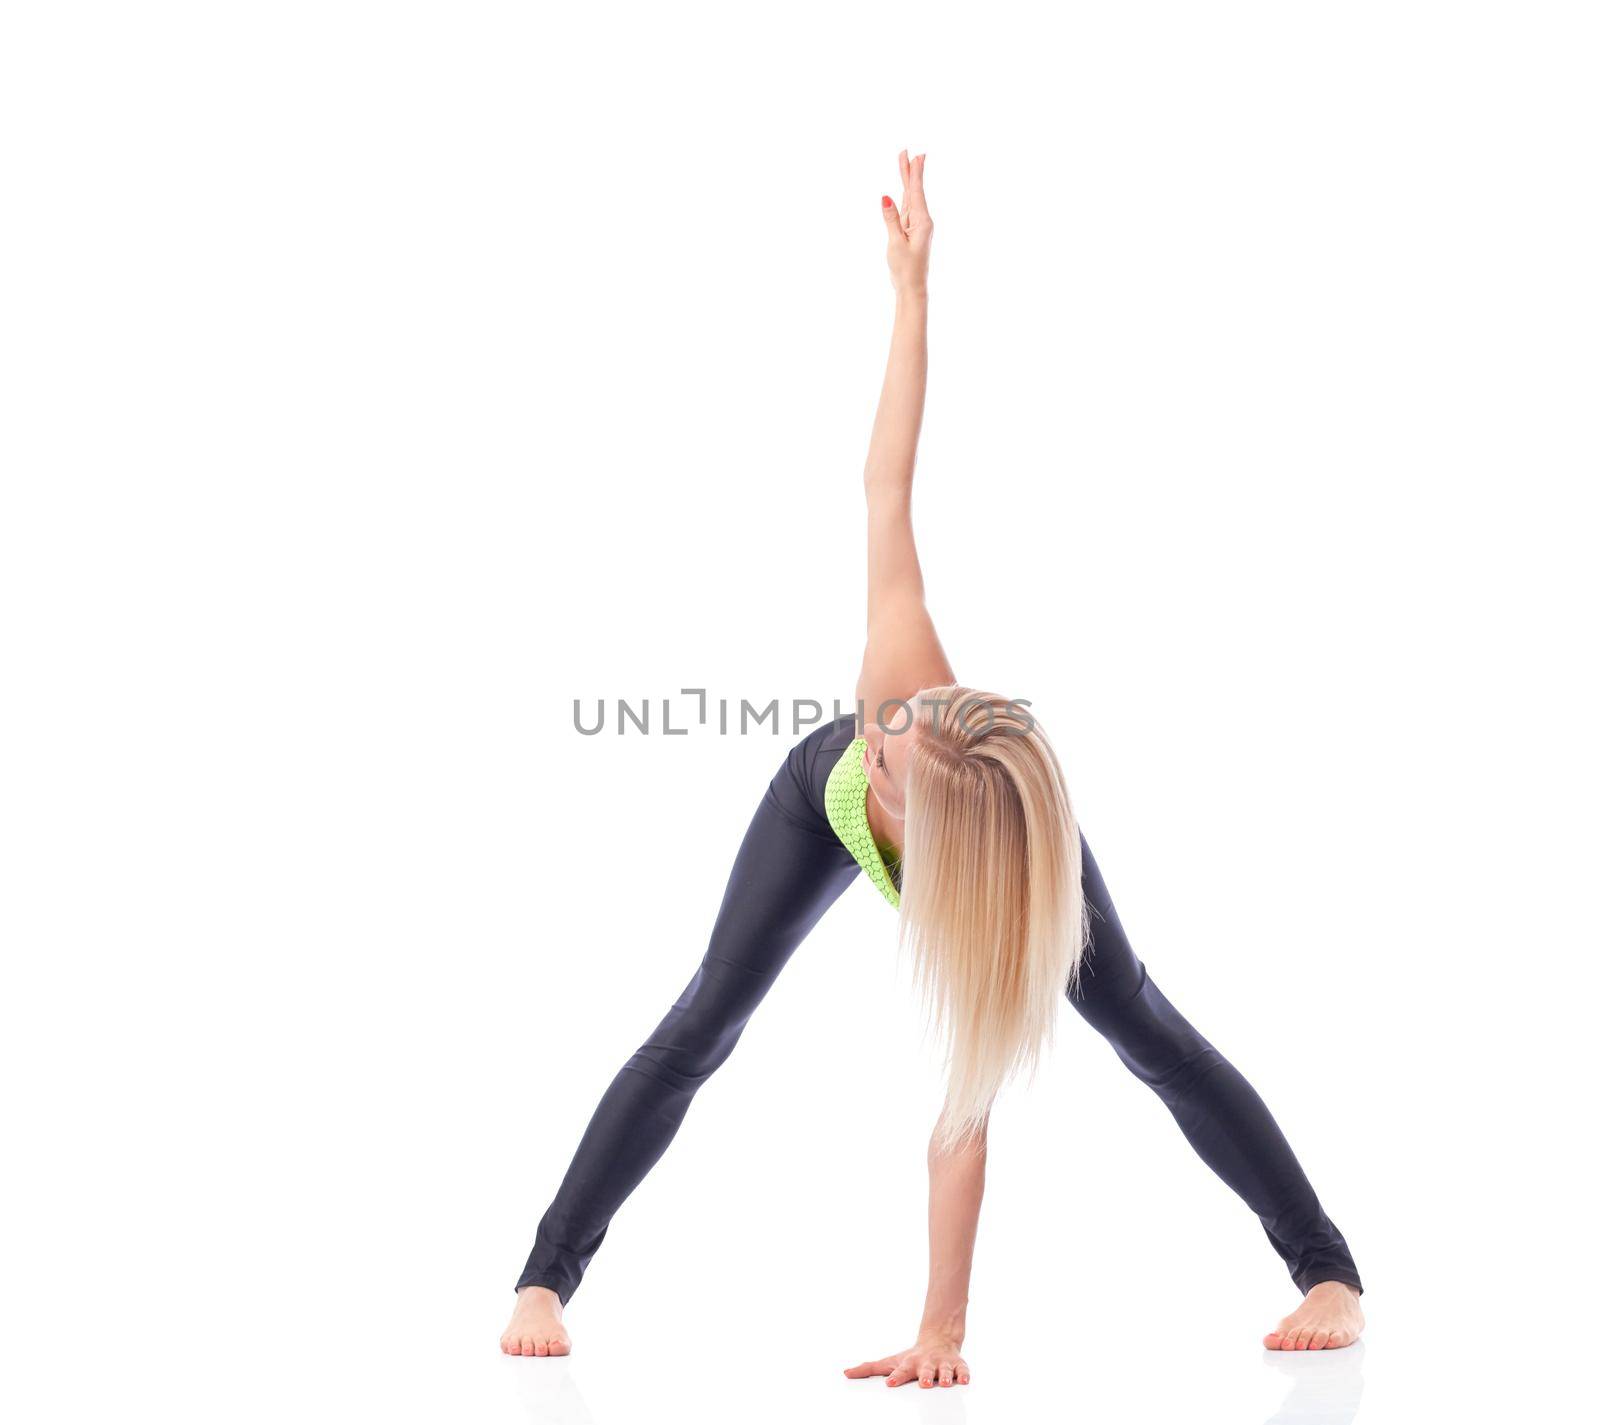 Sportive lifestyle. Fit and active young woman performing back stretching doing yoga asana at the studio isolated health stretching training concept copyspace